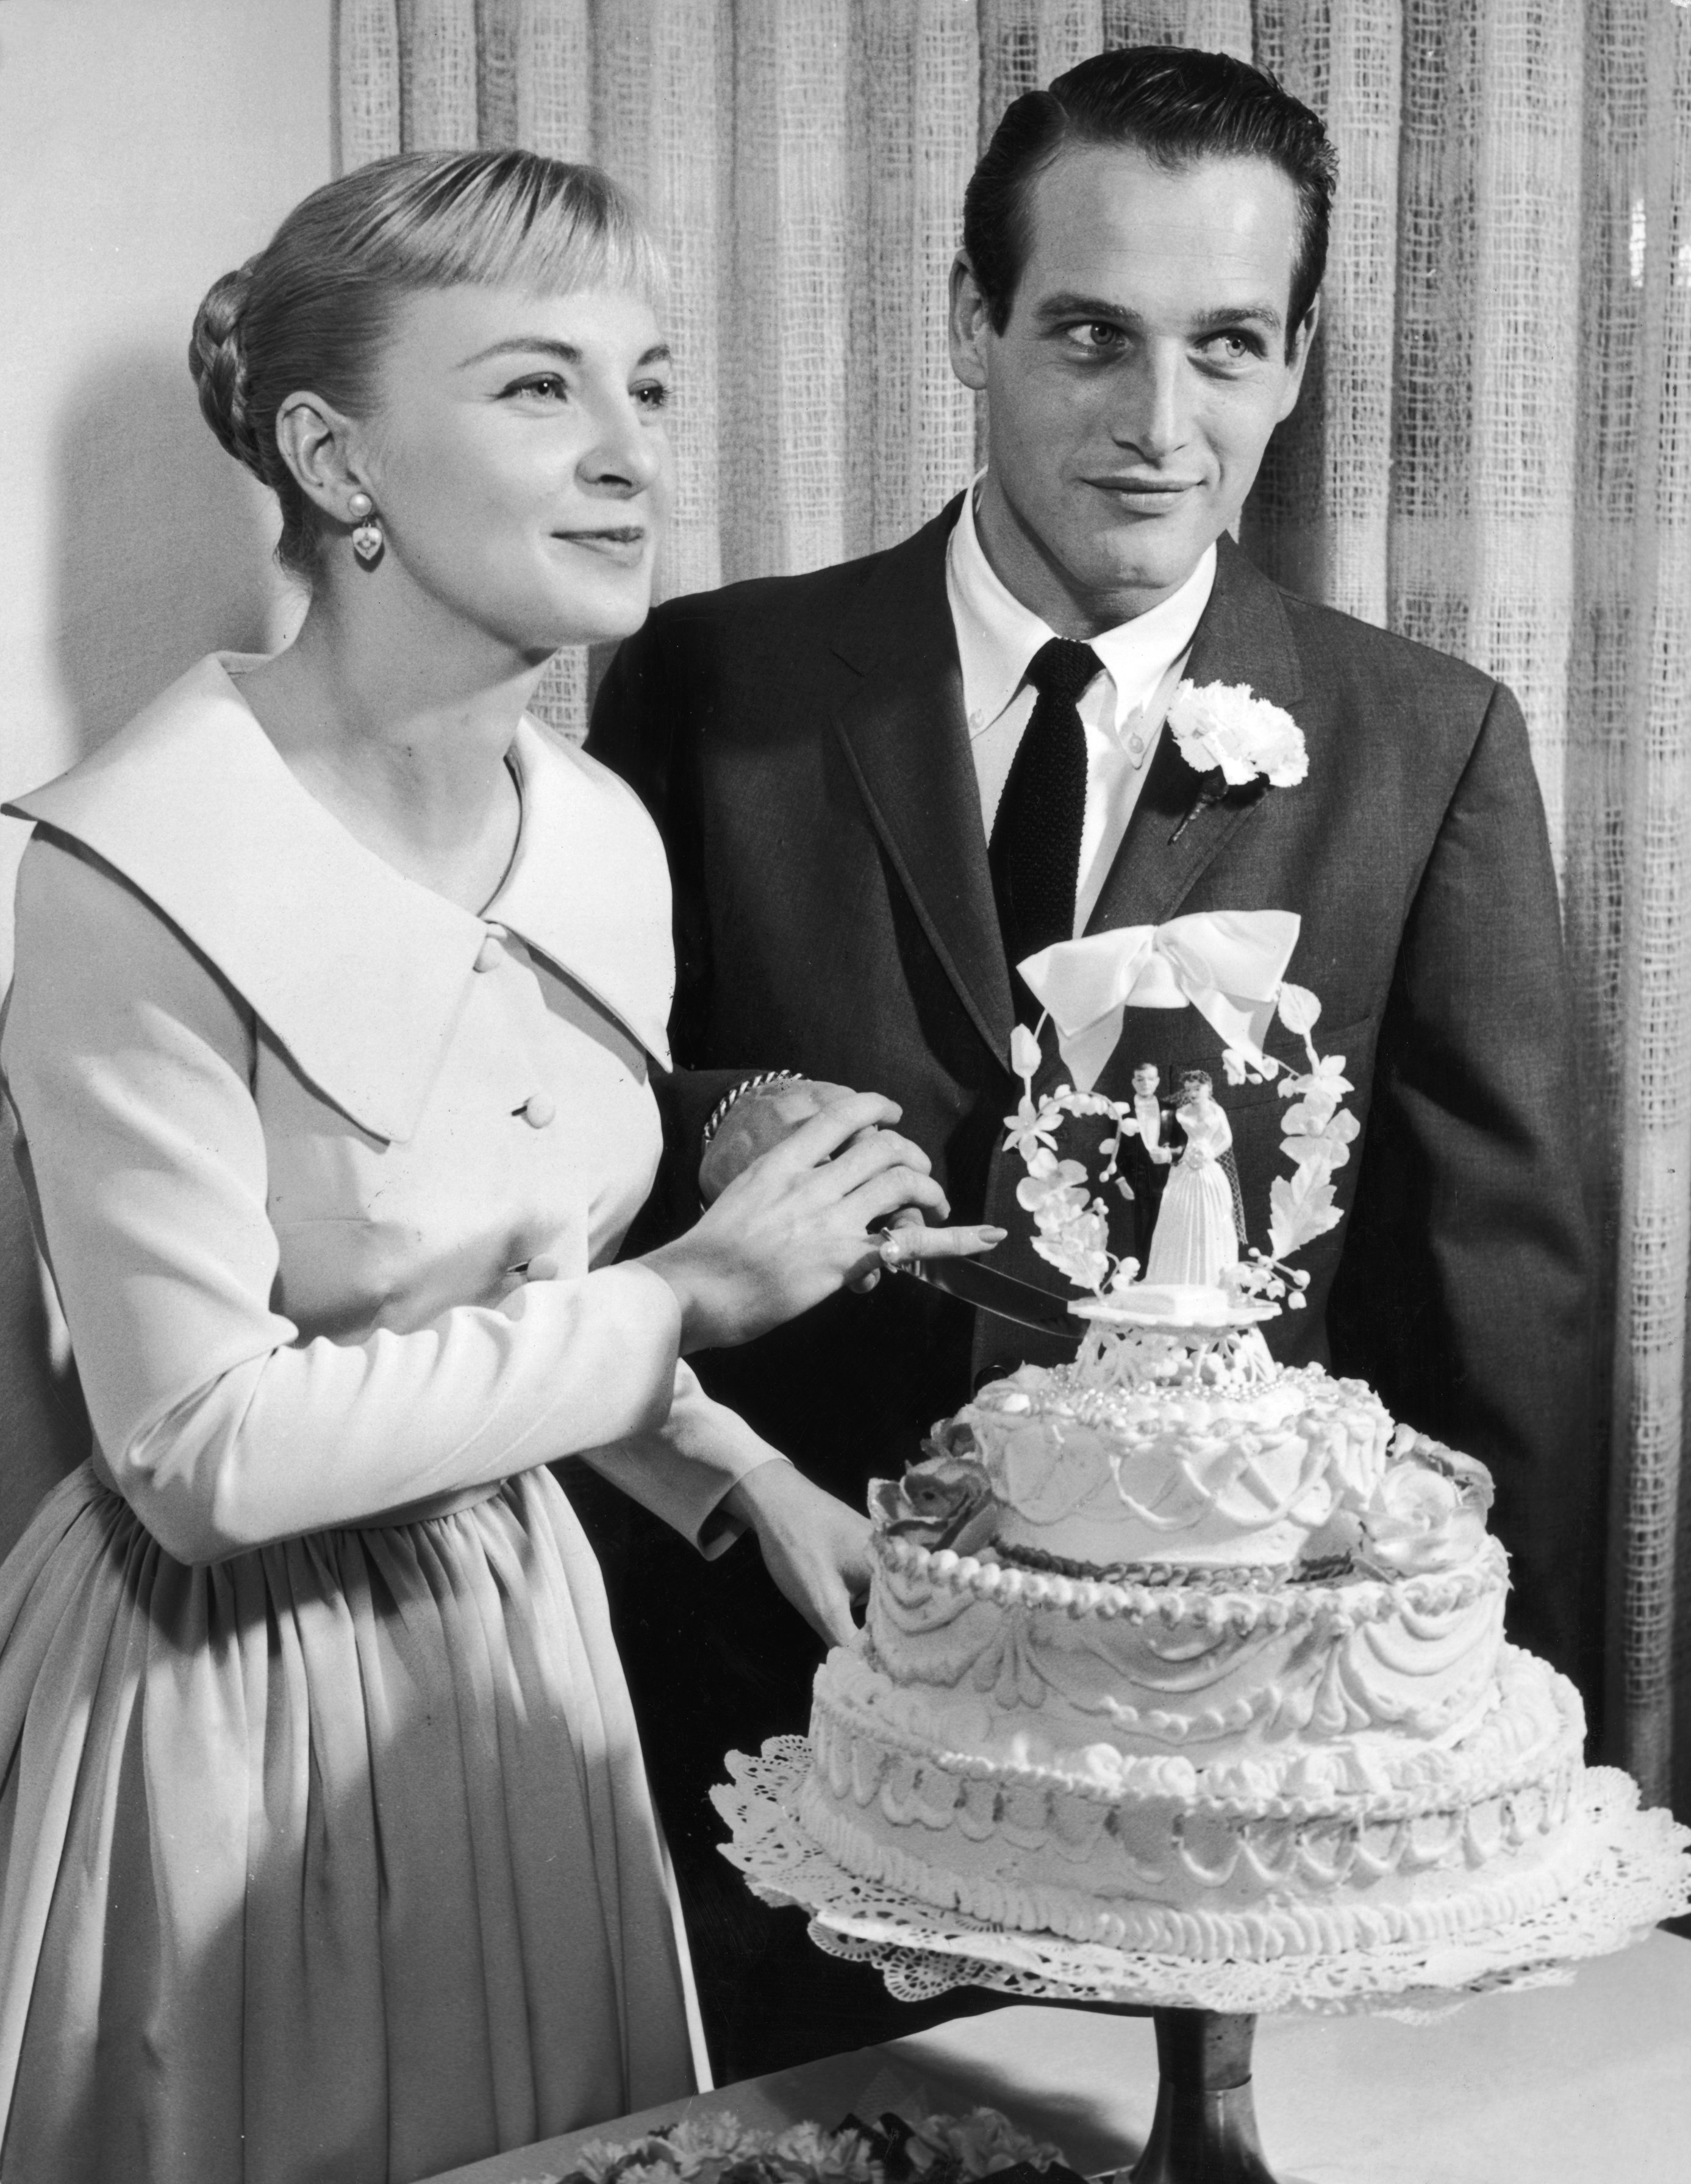 Joanne Woodward and Paul Newman during their wedding on January 29, 1958, in Las Vegas, Nevada. | Source: Getty Images